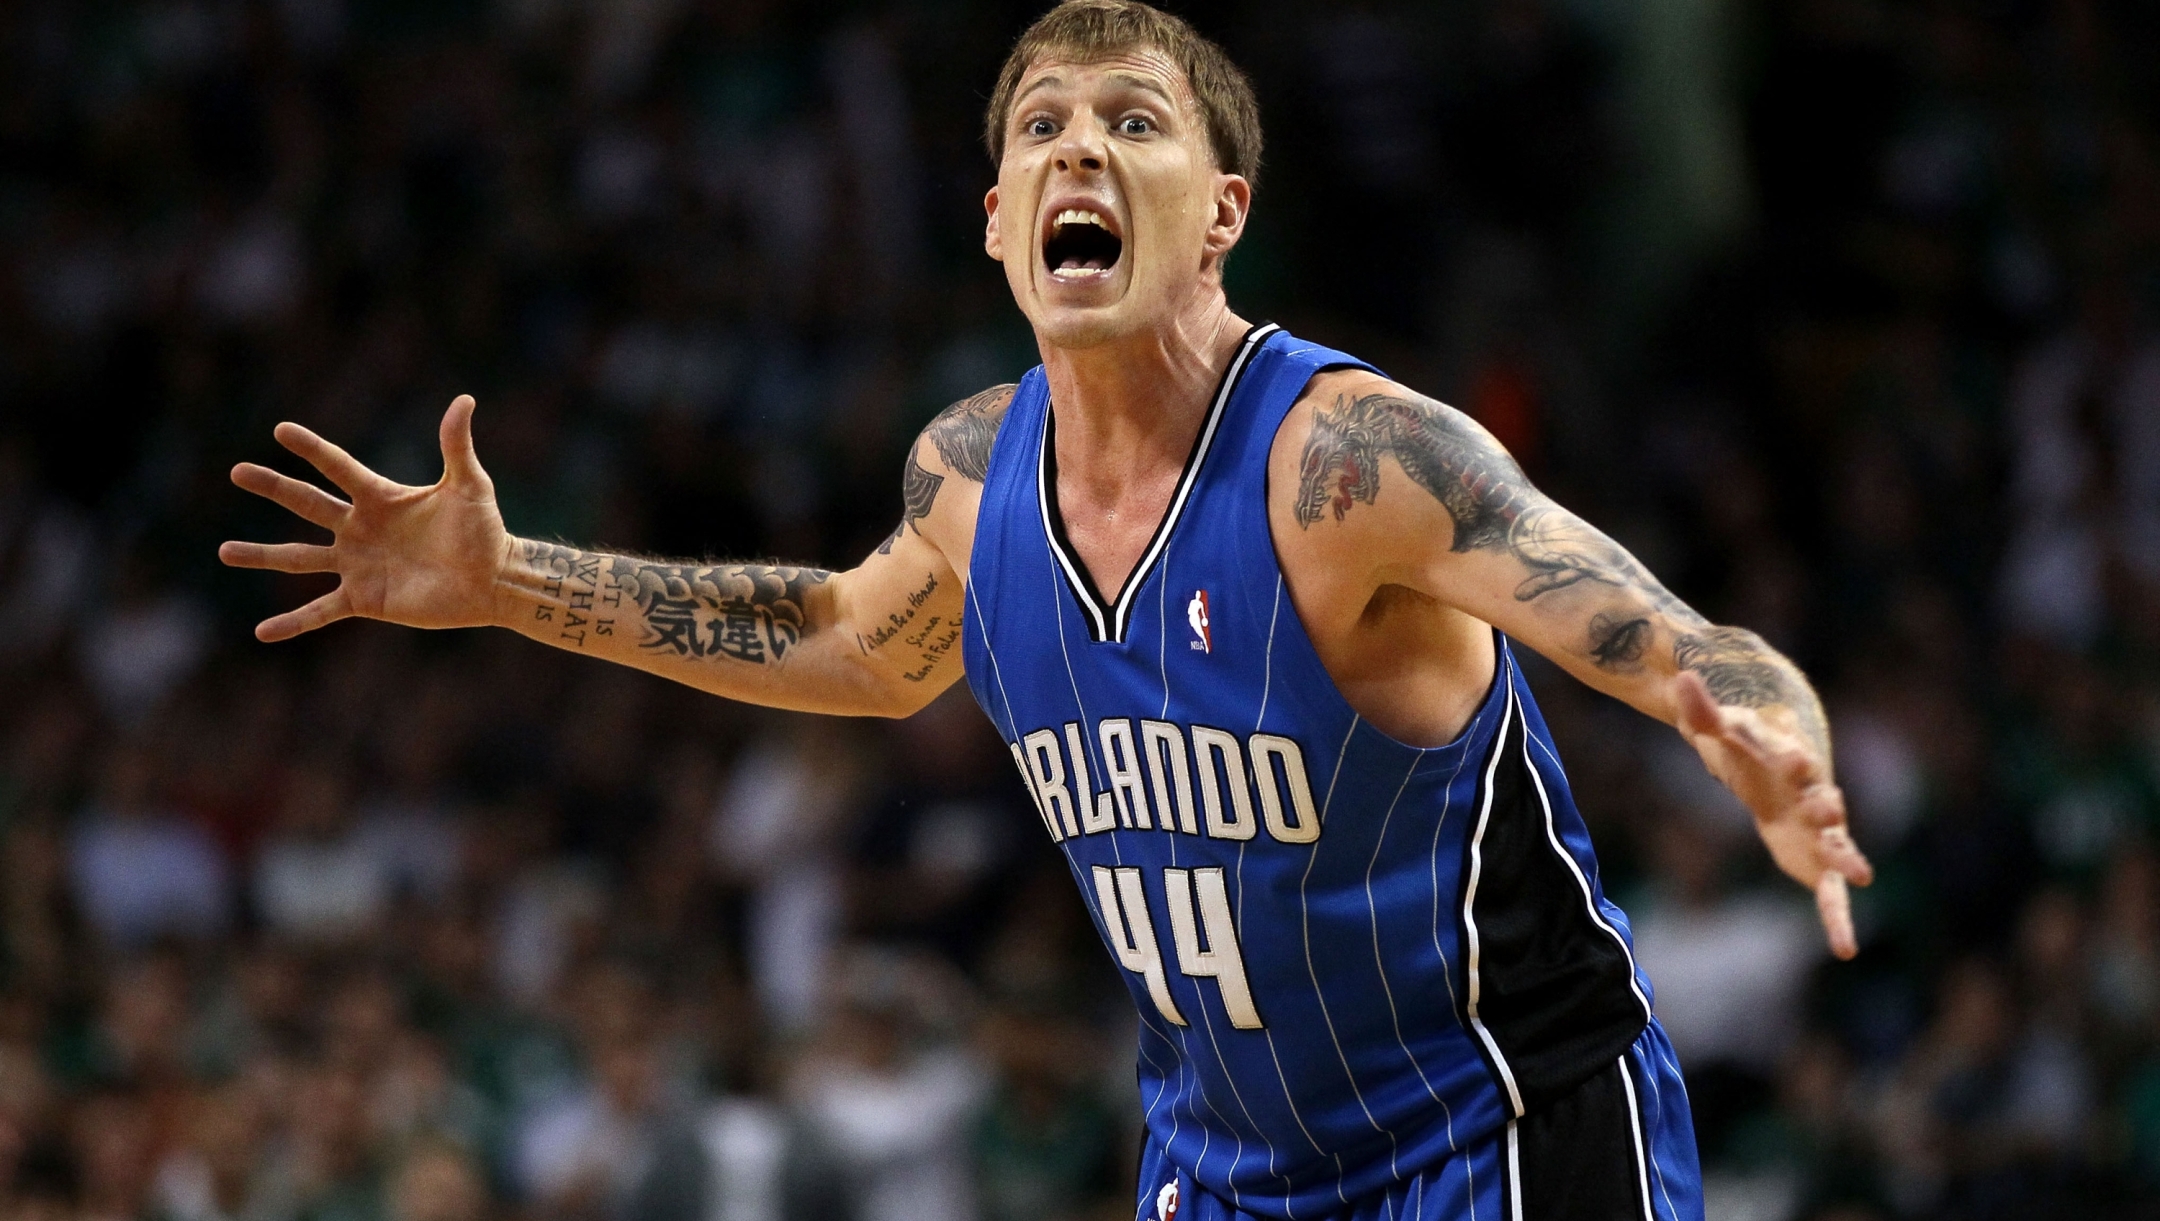 BOSTON - MAY 28: Jason Williams #44 of the Orlando Magic reacts against the Boston Celtics in Game Six of the Eastern Conference Finals during the 2010 NBA Playoffs at TD Garden on May 28, 2010 in Boston, Massachusetts. NOTE TO USER: User expressly acknowledges and agrees that, by downloading and/or using this Photograph, user is consenting to the terms and conditions of the Getty Images License Agreement.   Elsa/Getty Images/AFP (Photo by ELSA / GETTY IMAGES NORTH AMERICA / Getty Images via AFP)